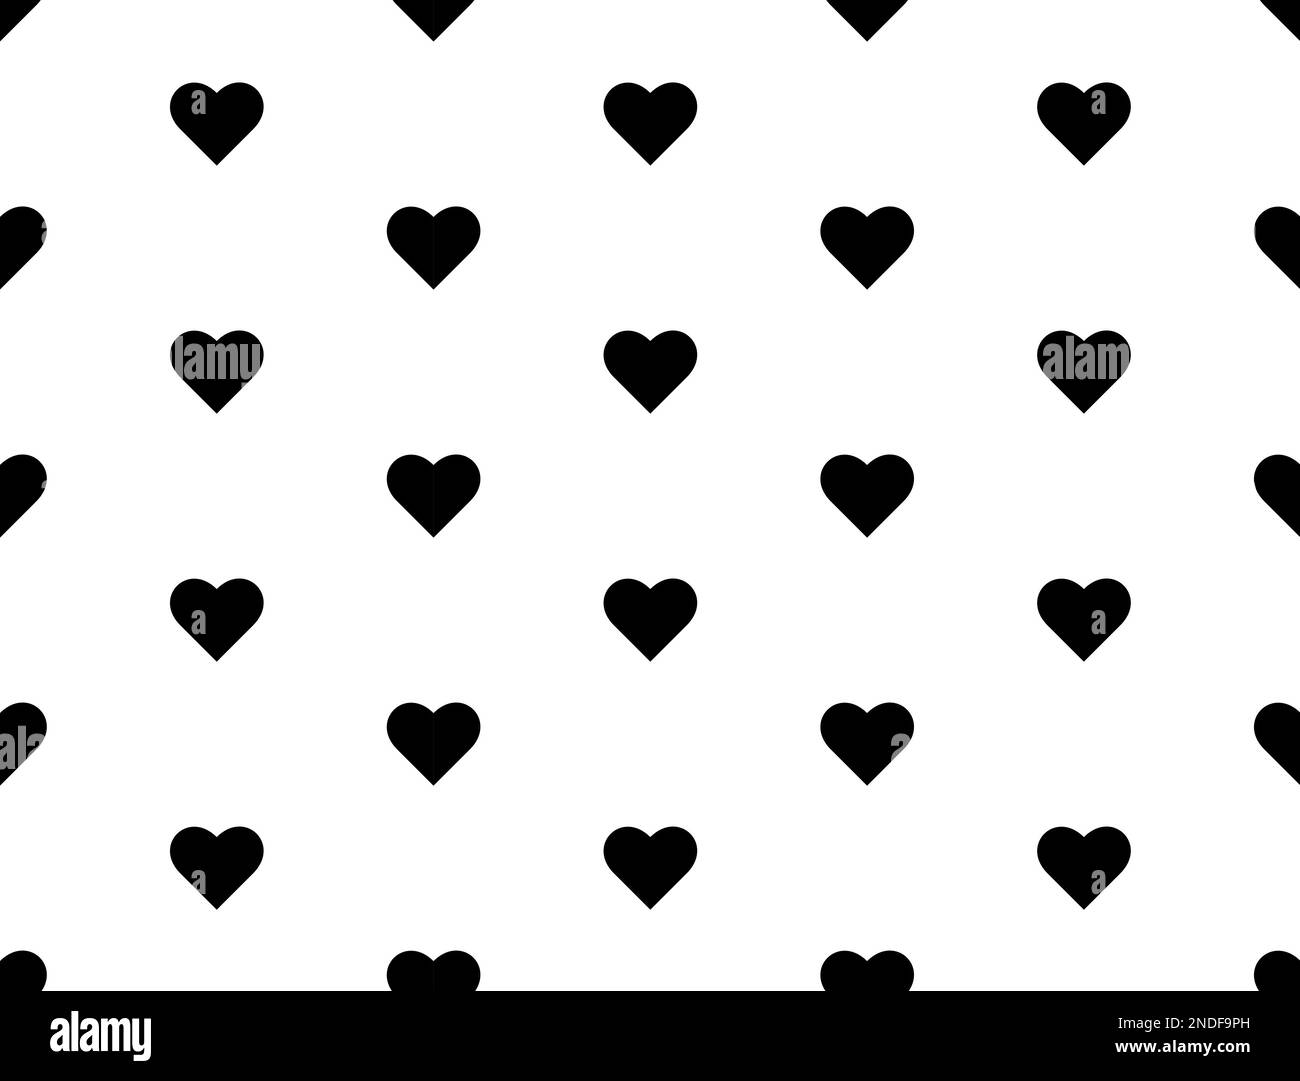 Heart pattern Black and White Stock Photos & Images - Alamy